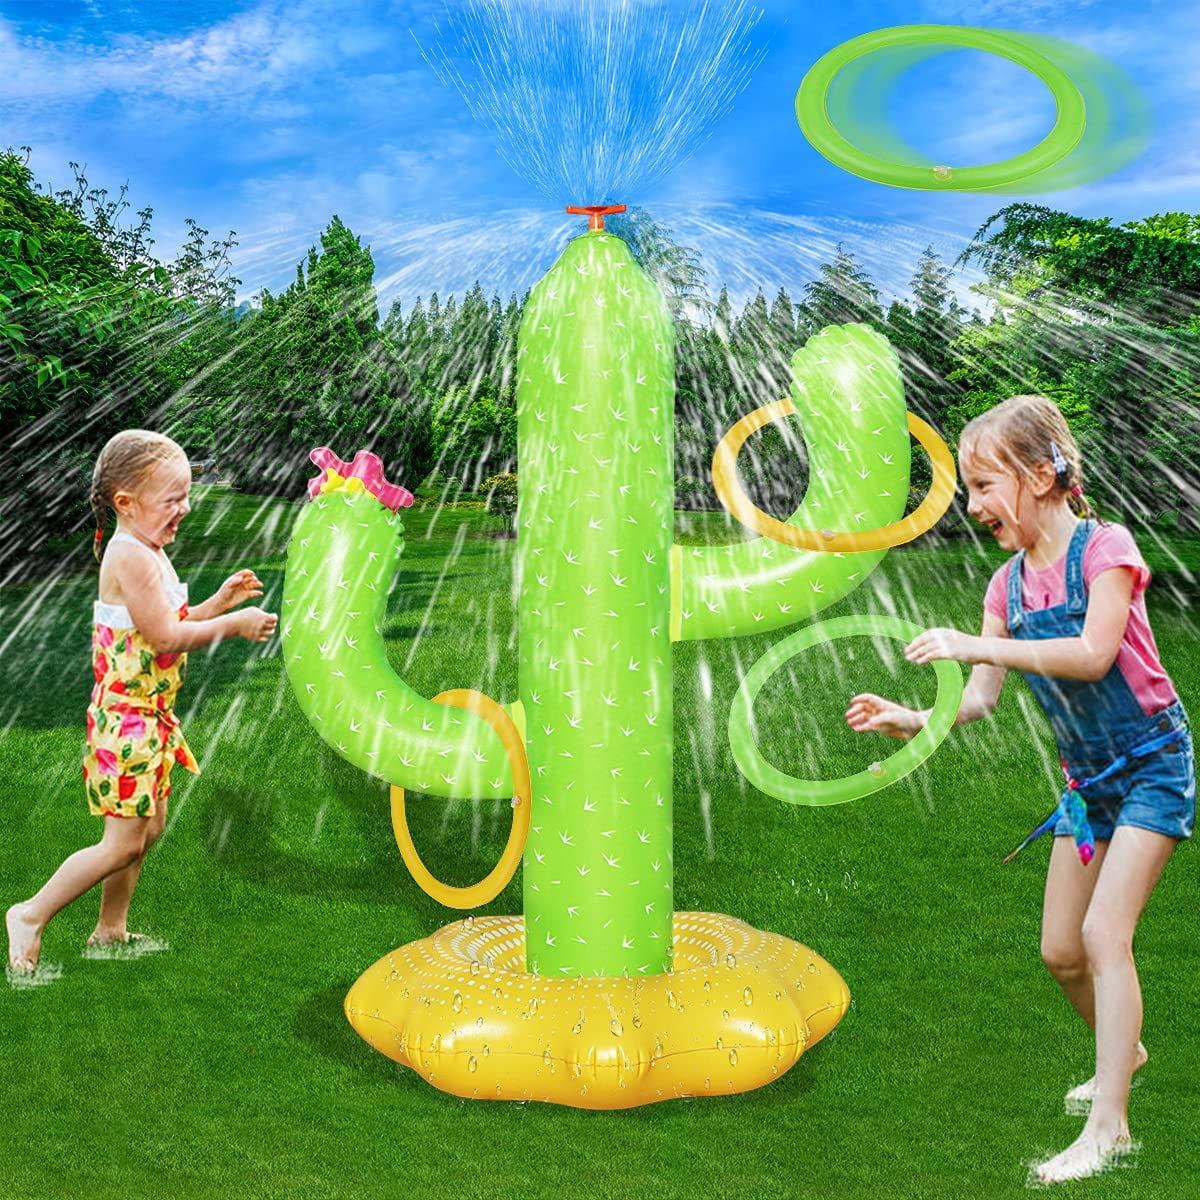 Girls, 4 Years 3 Summer for Children Toy 4 Sprinkler Gifts with U Ages Spray Water Game Rings, Inflatable 6 Backyard Sprinkler Cactus Fun Toys Boys Cactus 5 Water for and for Kids, Outdoor